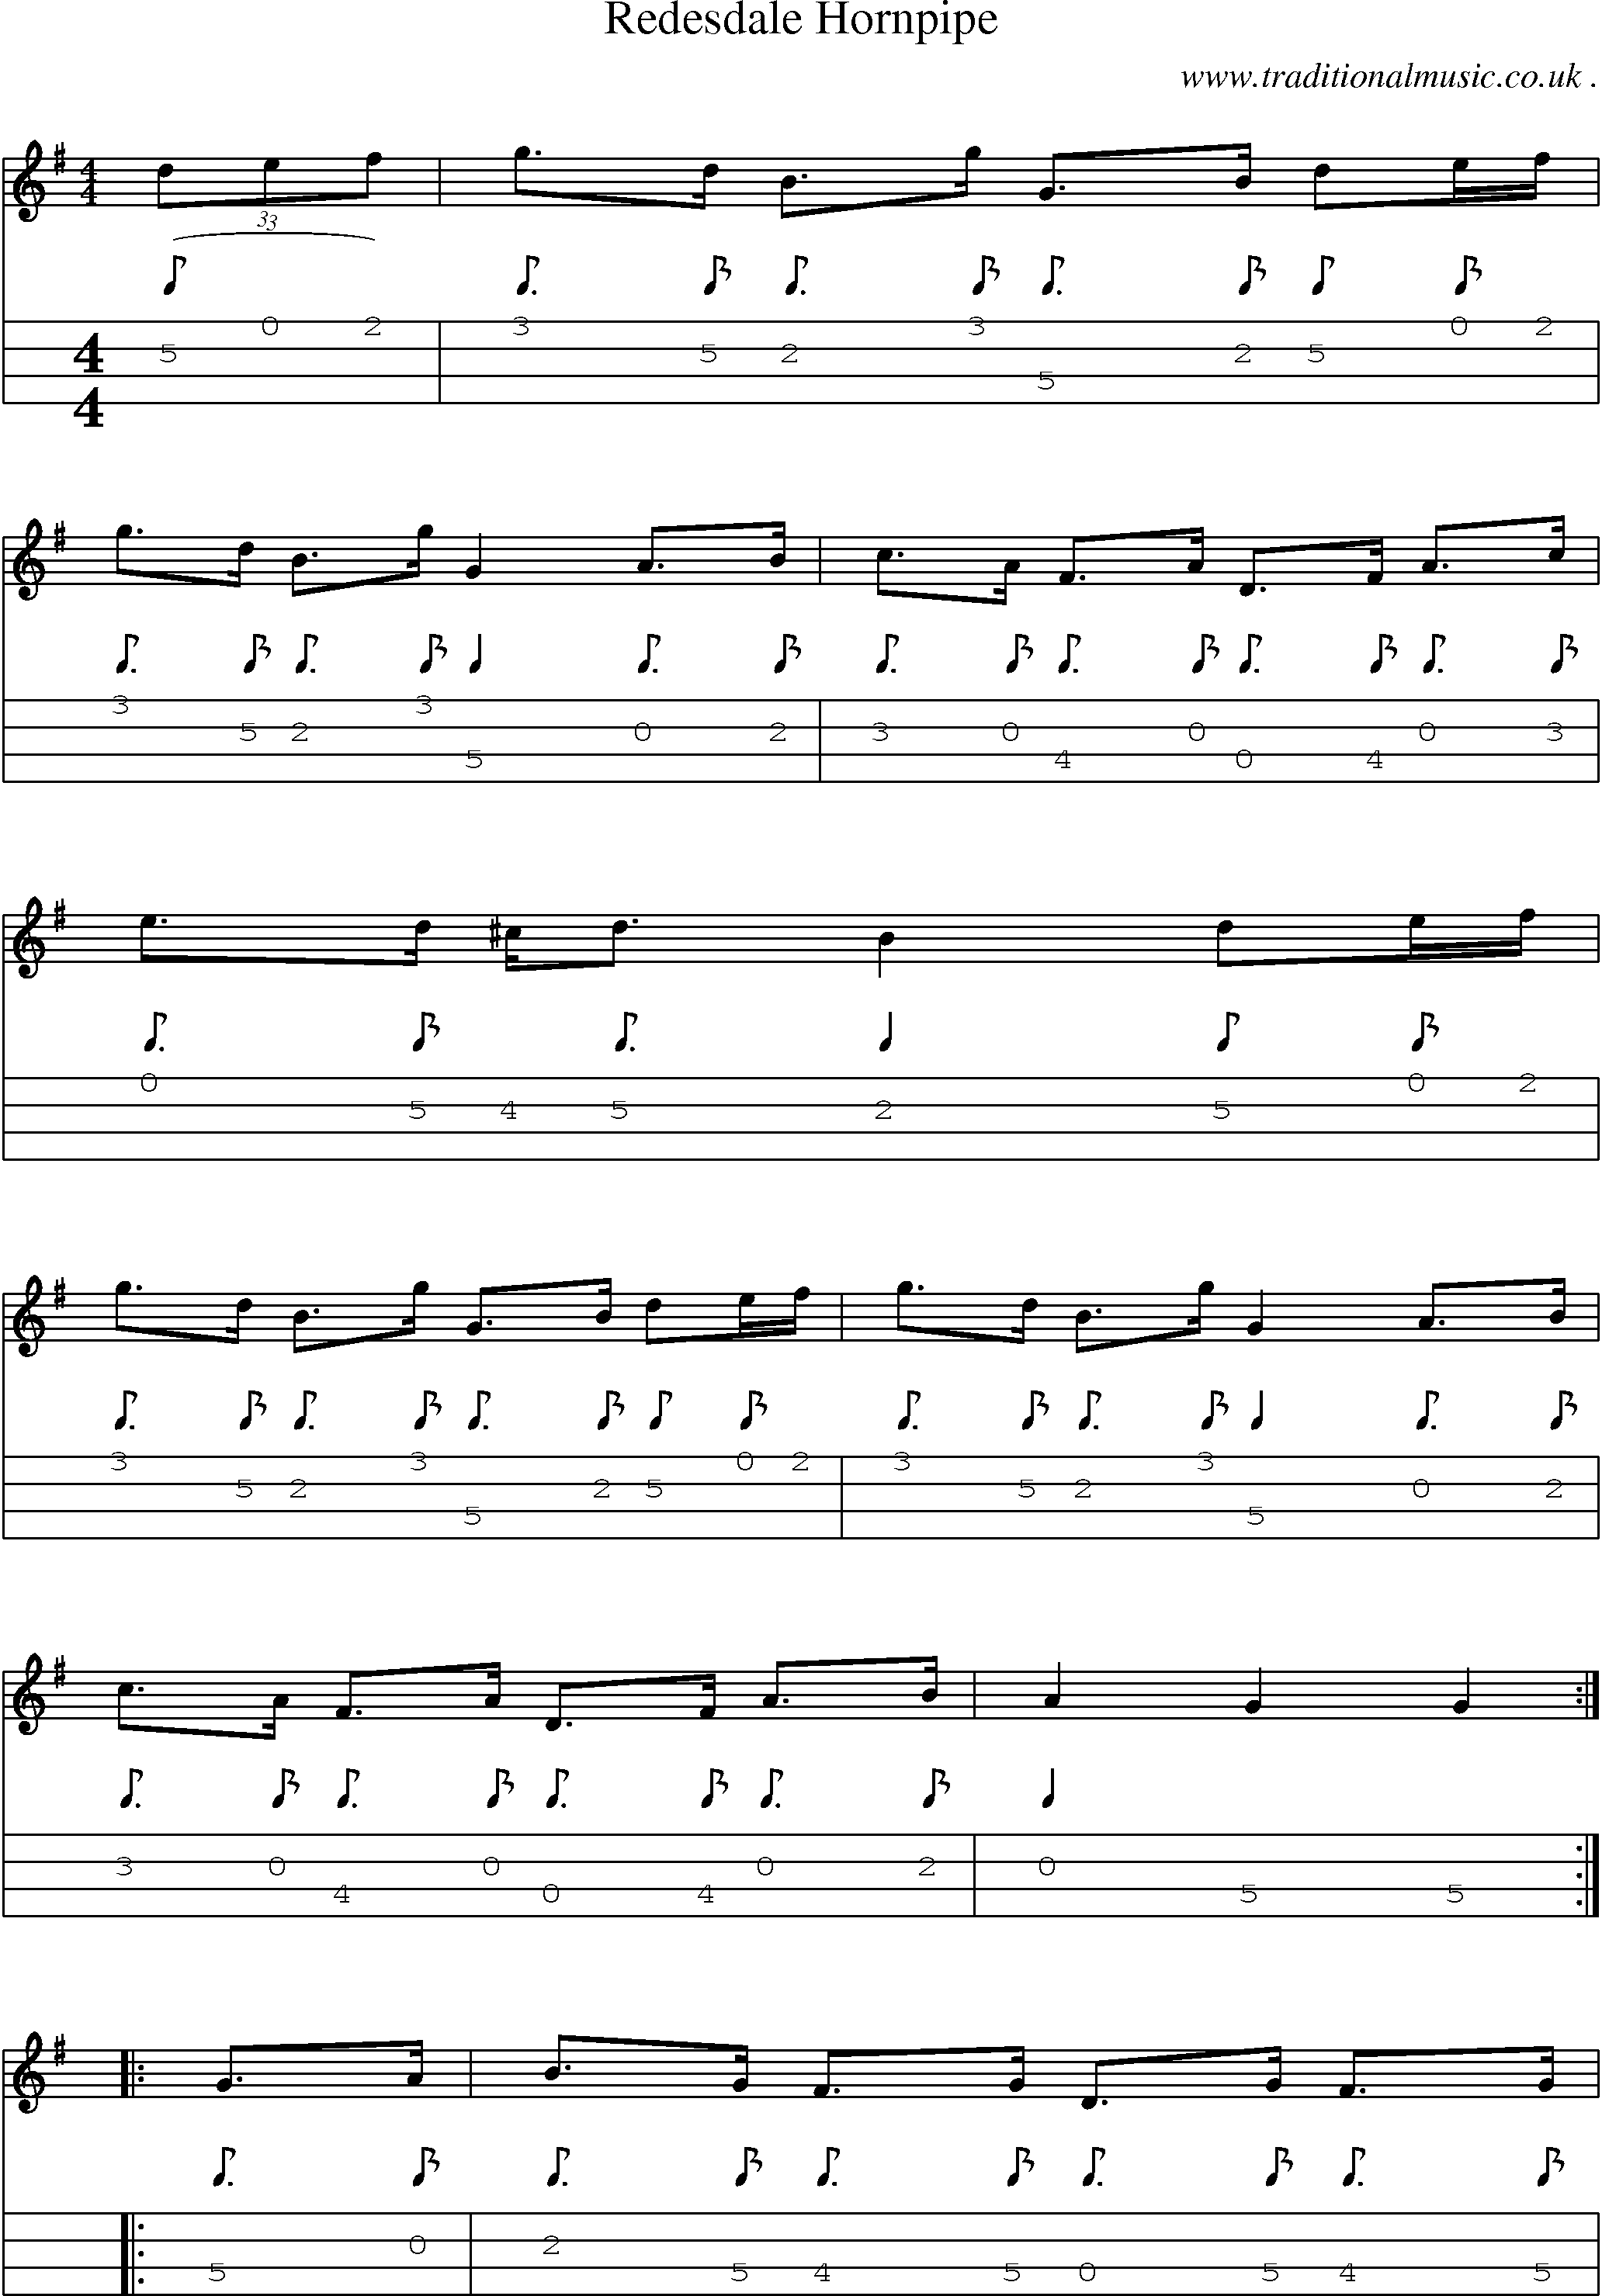 Sheet-Music and Mandolin Tabs for Redesdale Hornpipe